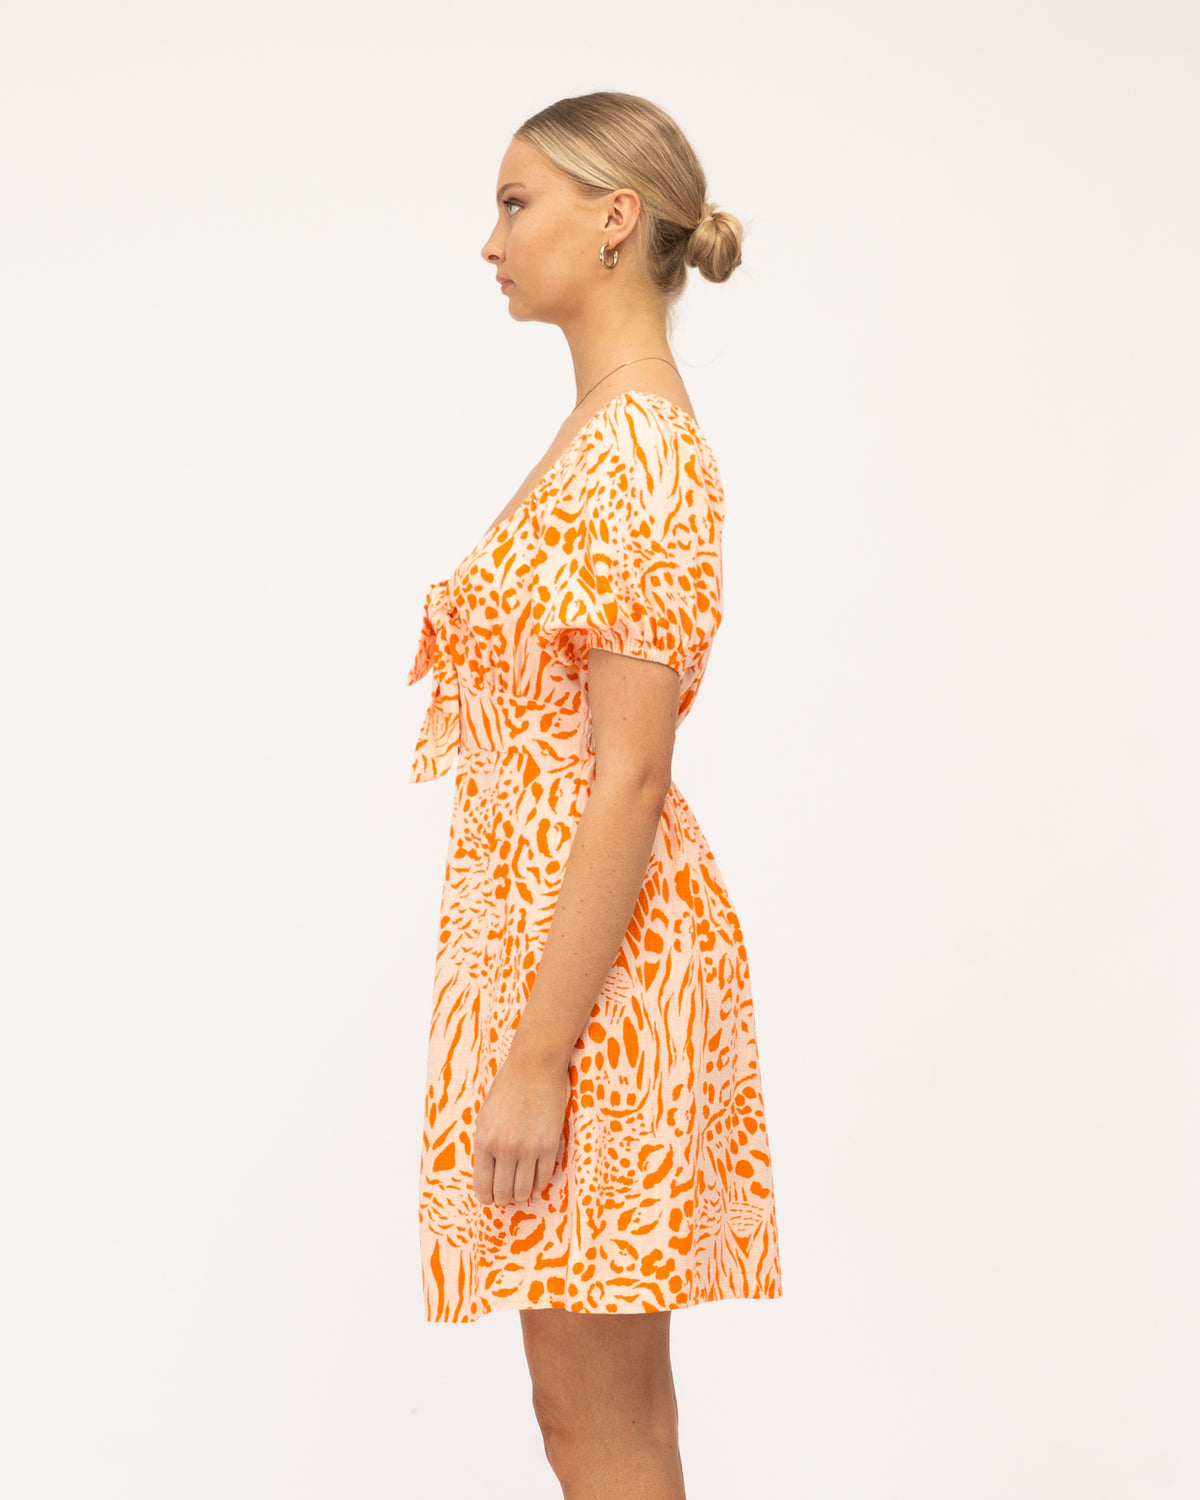 A young woman wearing a linen blend mini dress featuring an exclusive orange animal print, balloon short sleeves, a button-through front, and an elasticated drop shoulder detail designed by Global Fashion House.